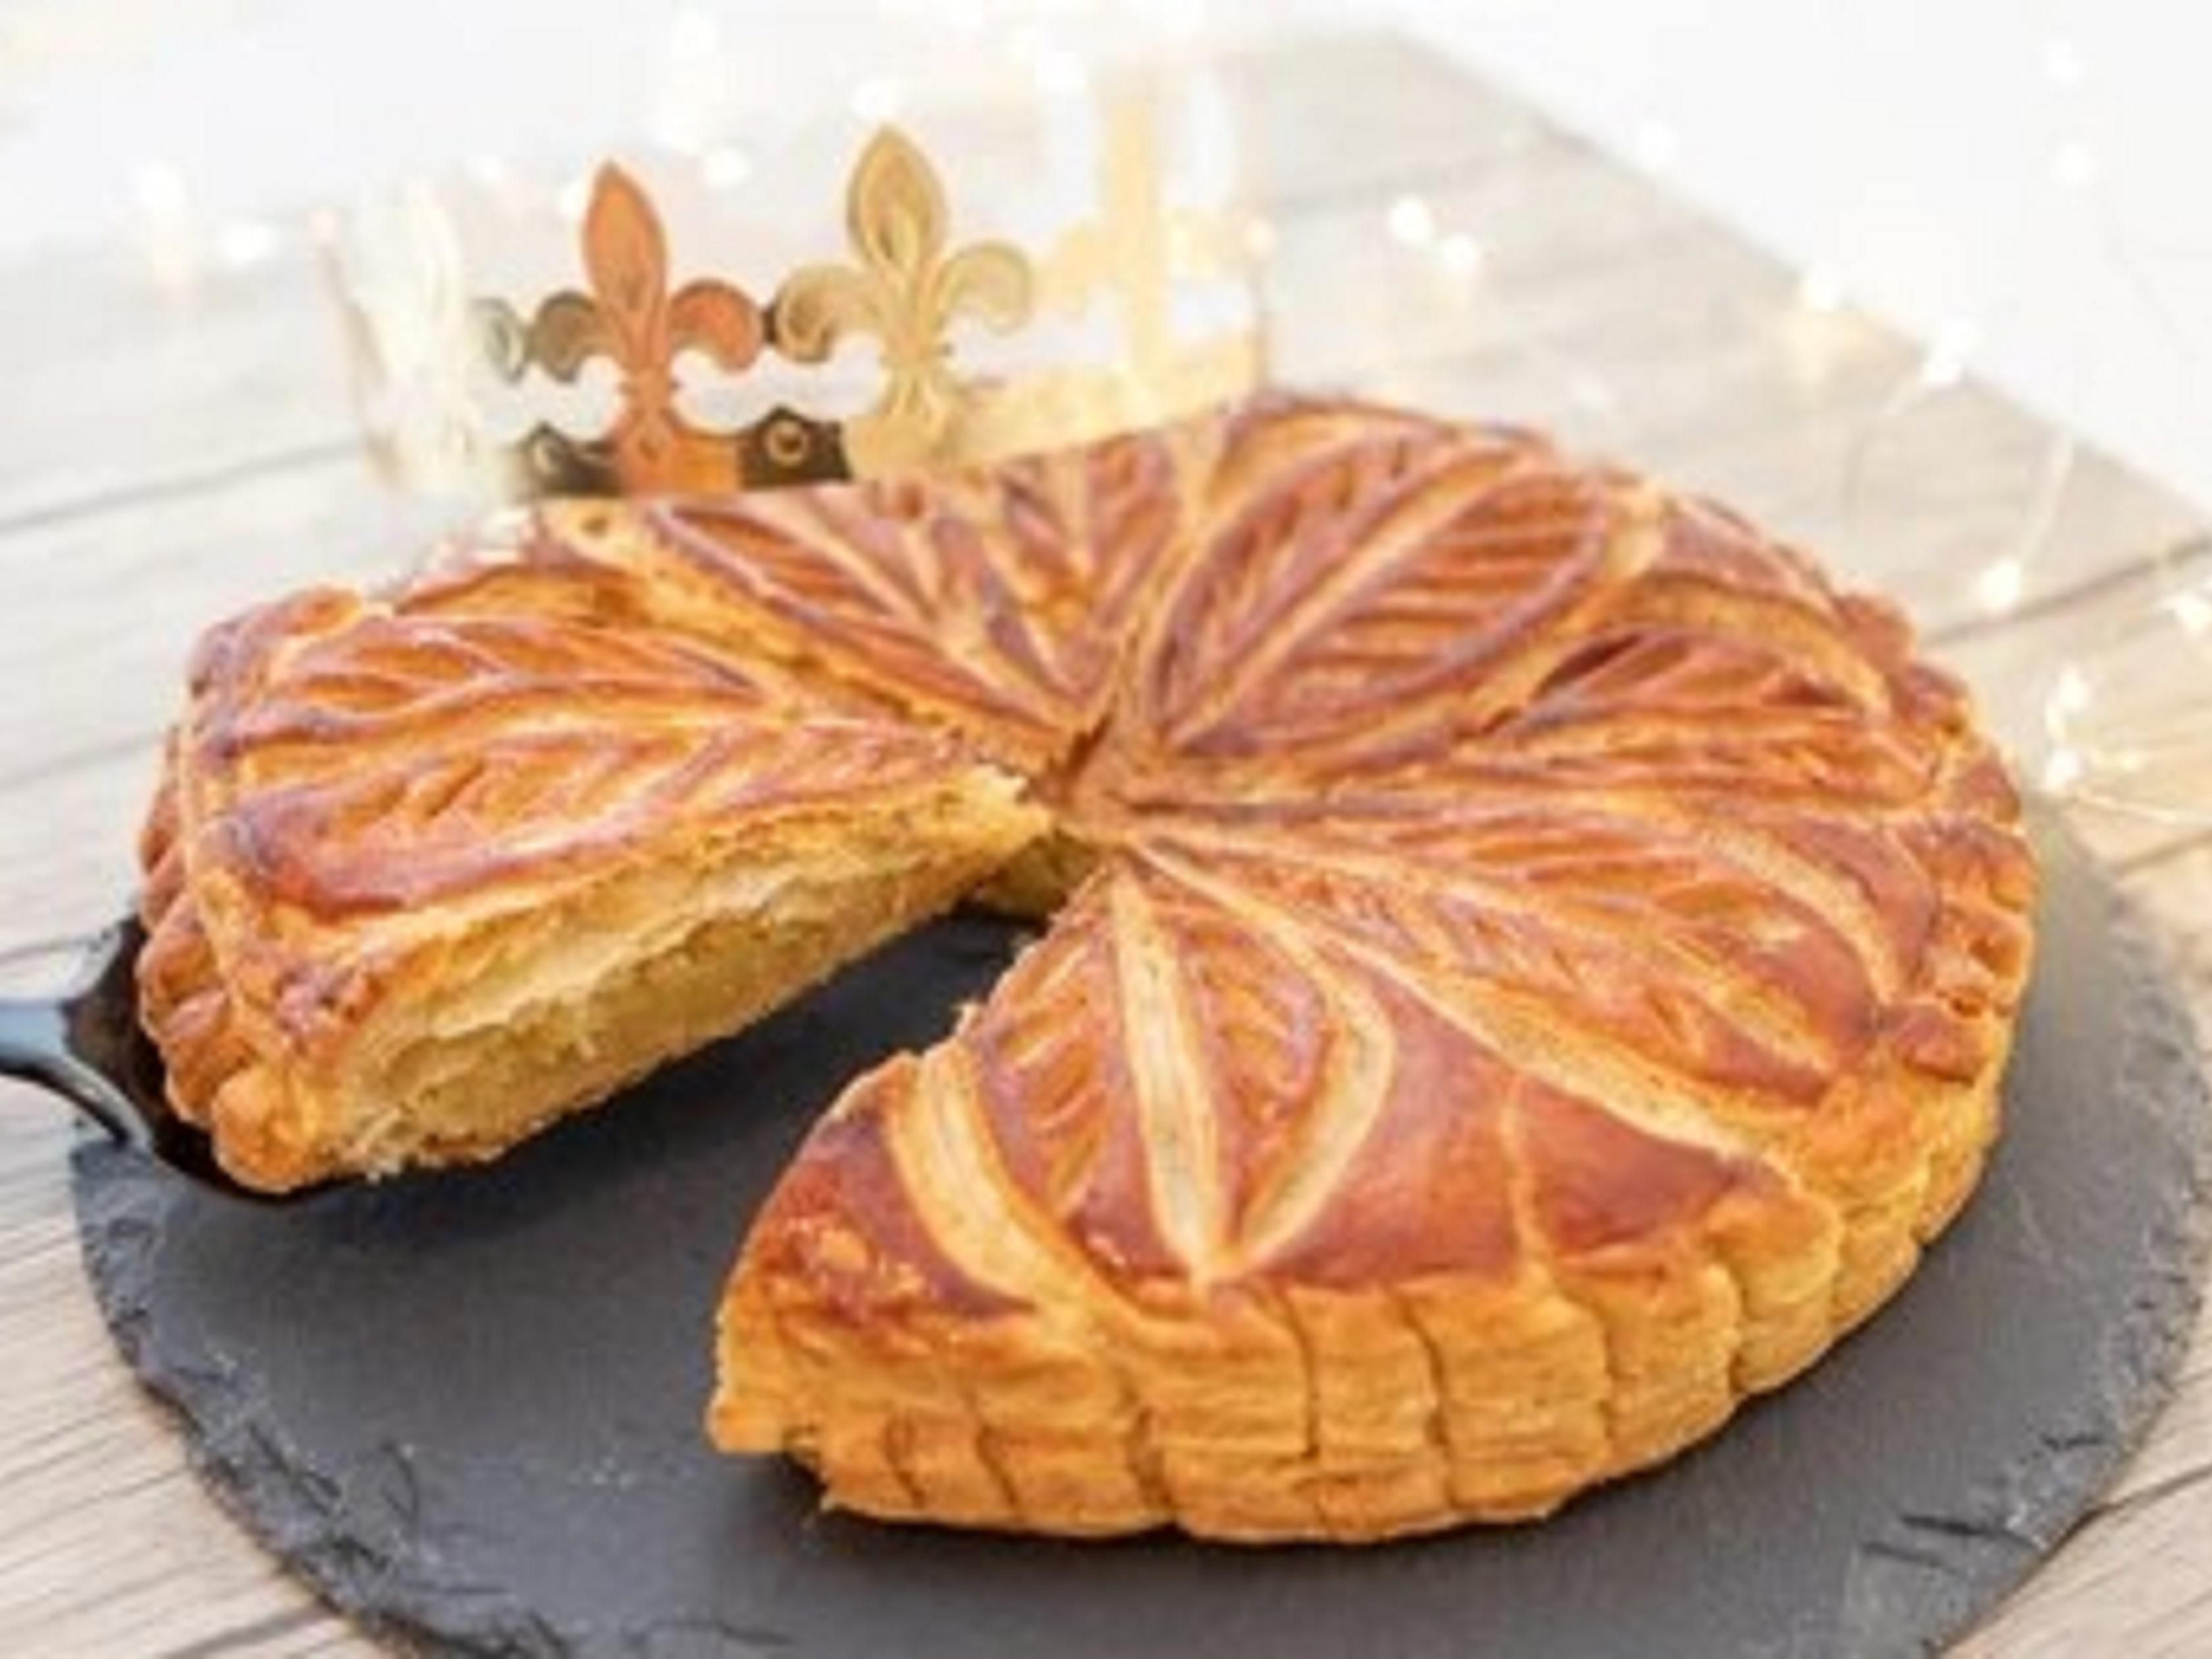 To celebrate the Epiphany, enjoy Galette des Rois for breakfast !